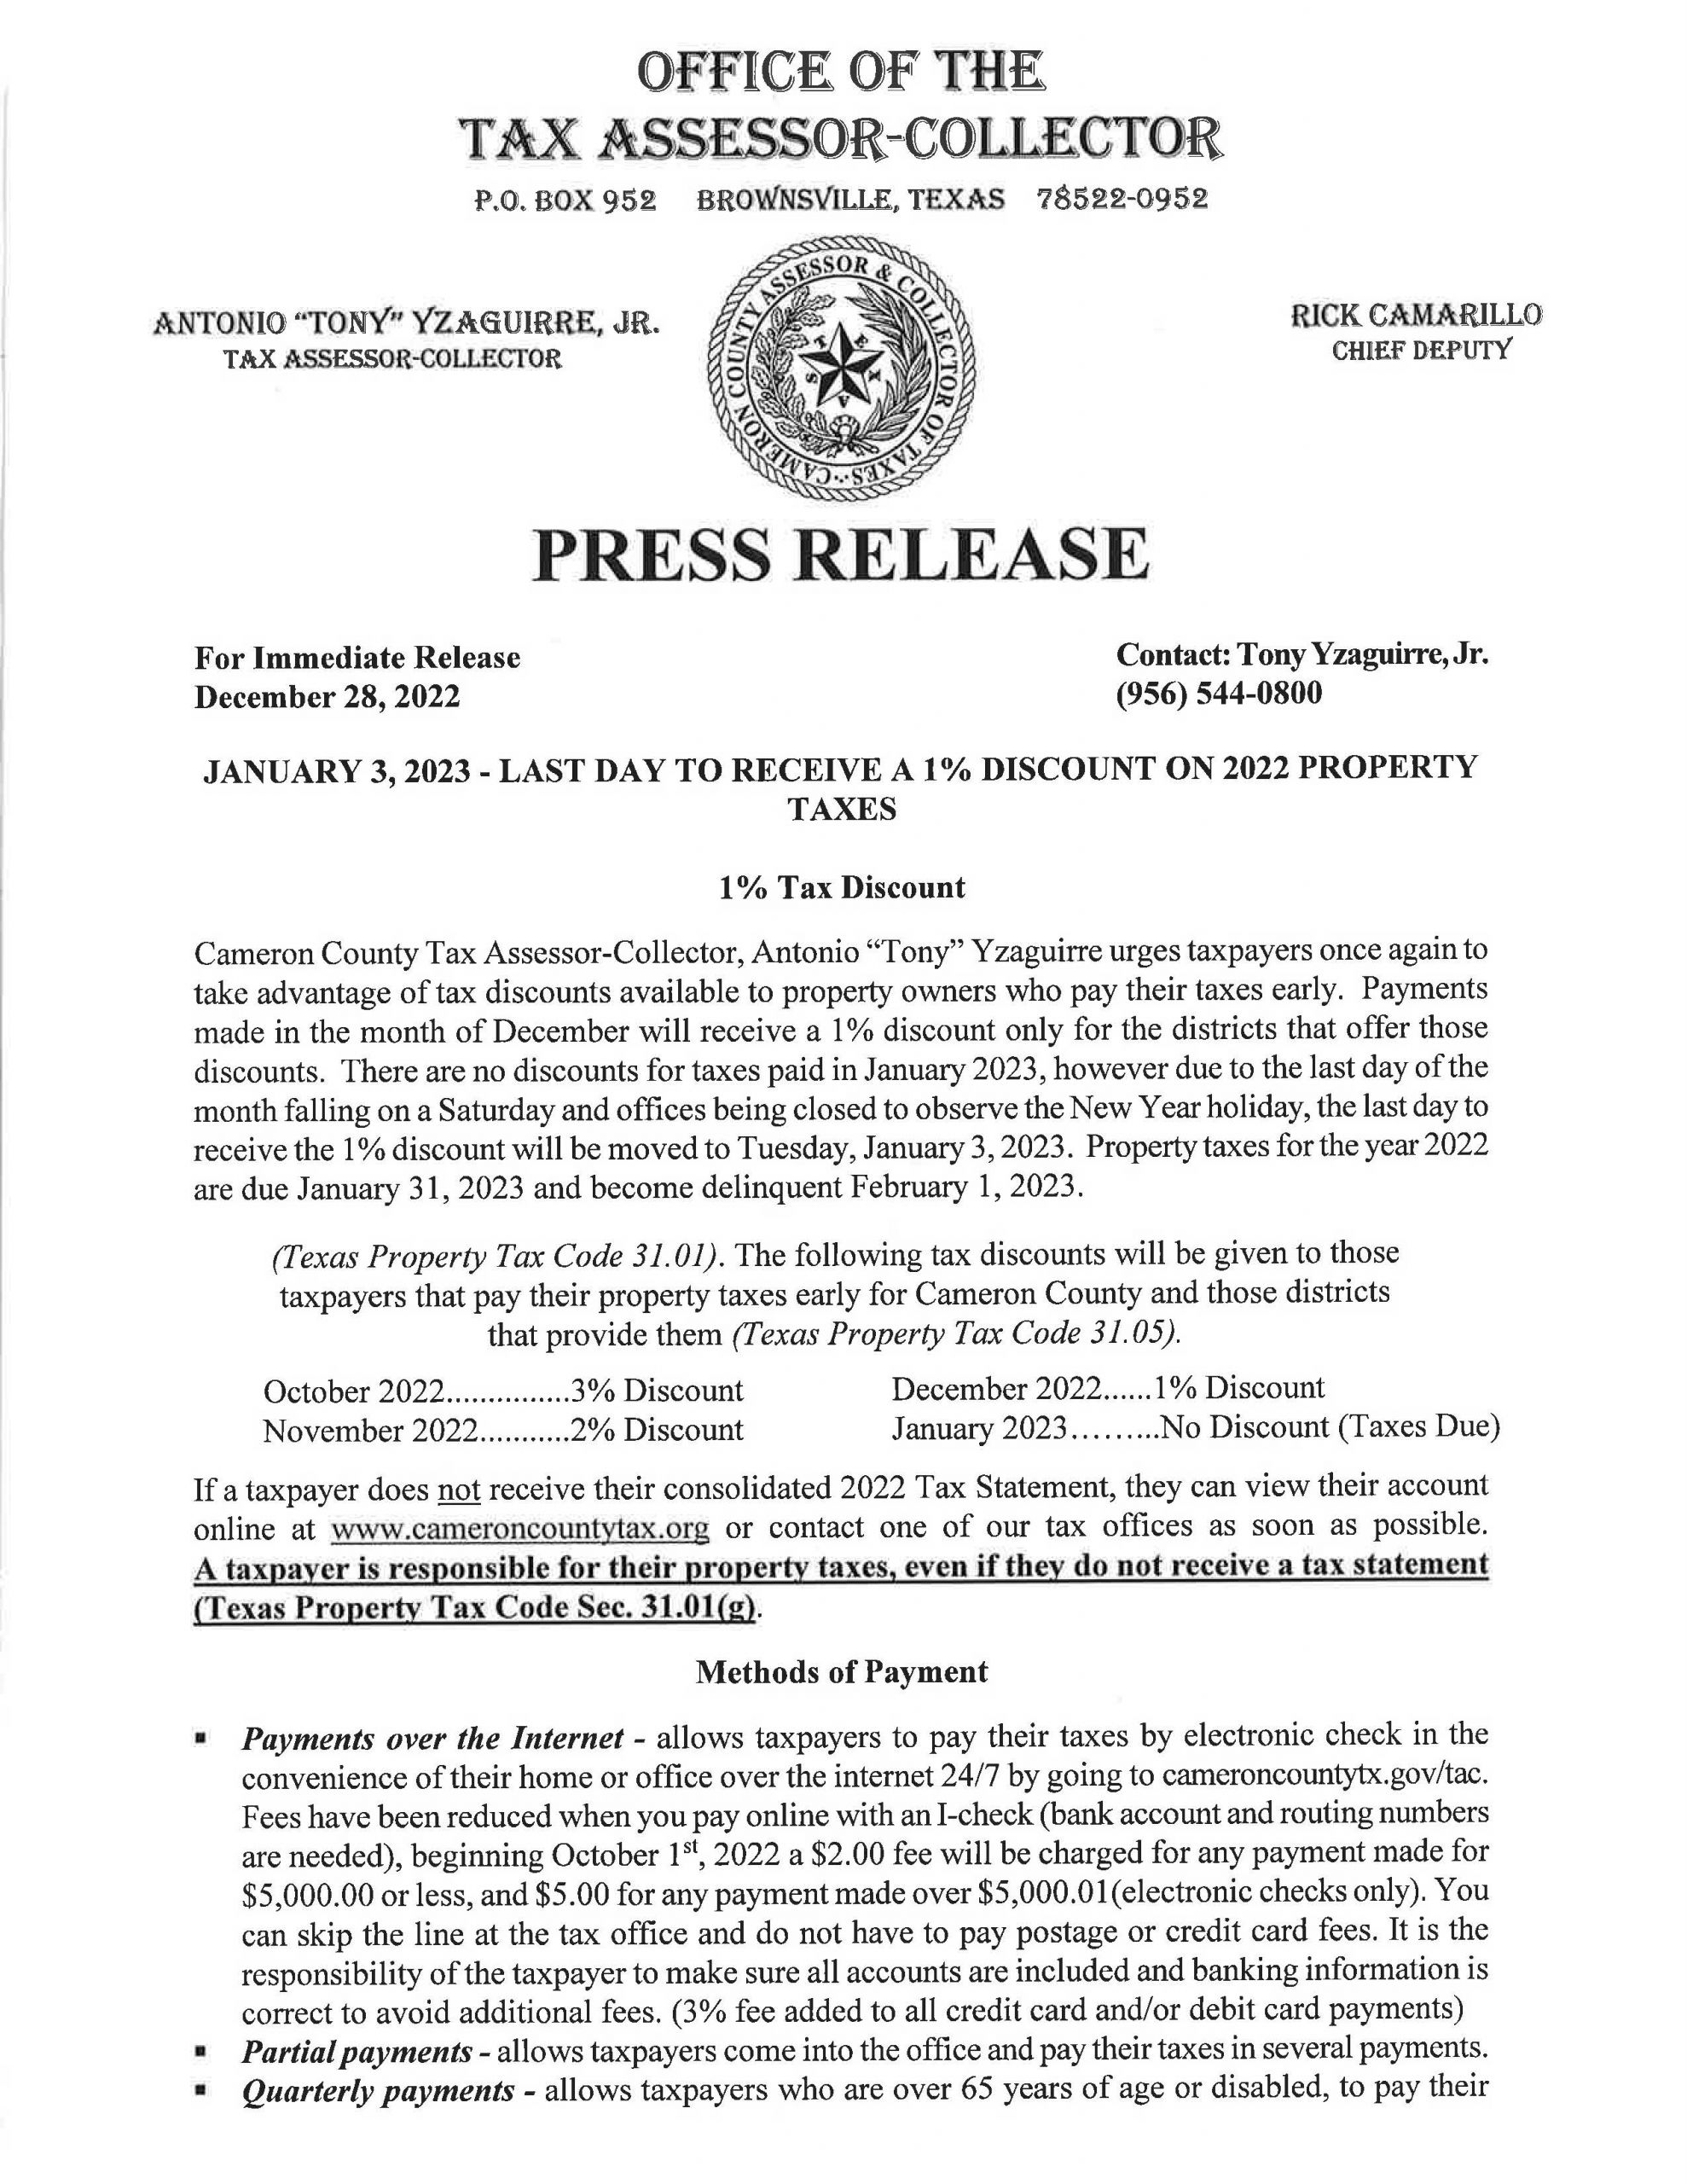 Press Release 2022 Property Tax 1 Percent Discount Page 1 Scaled